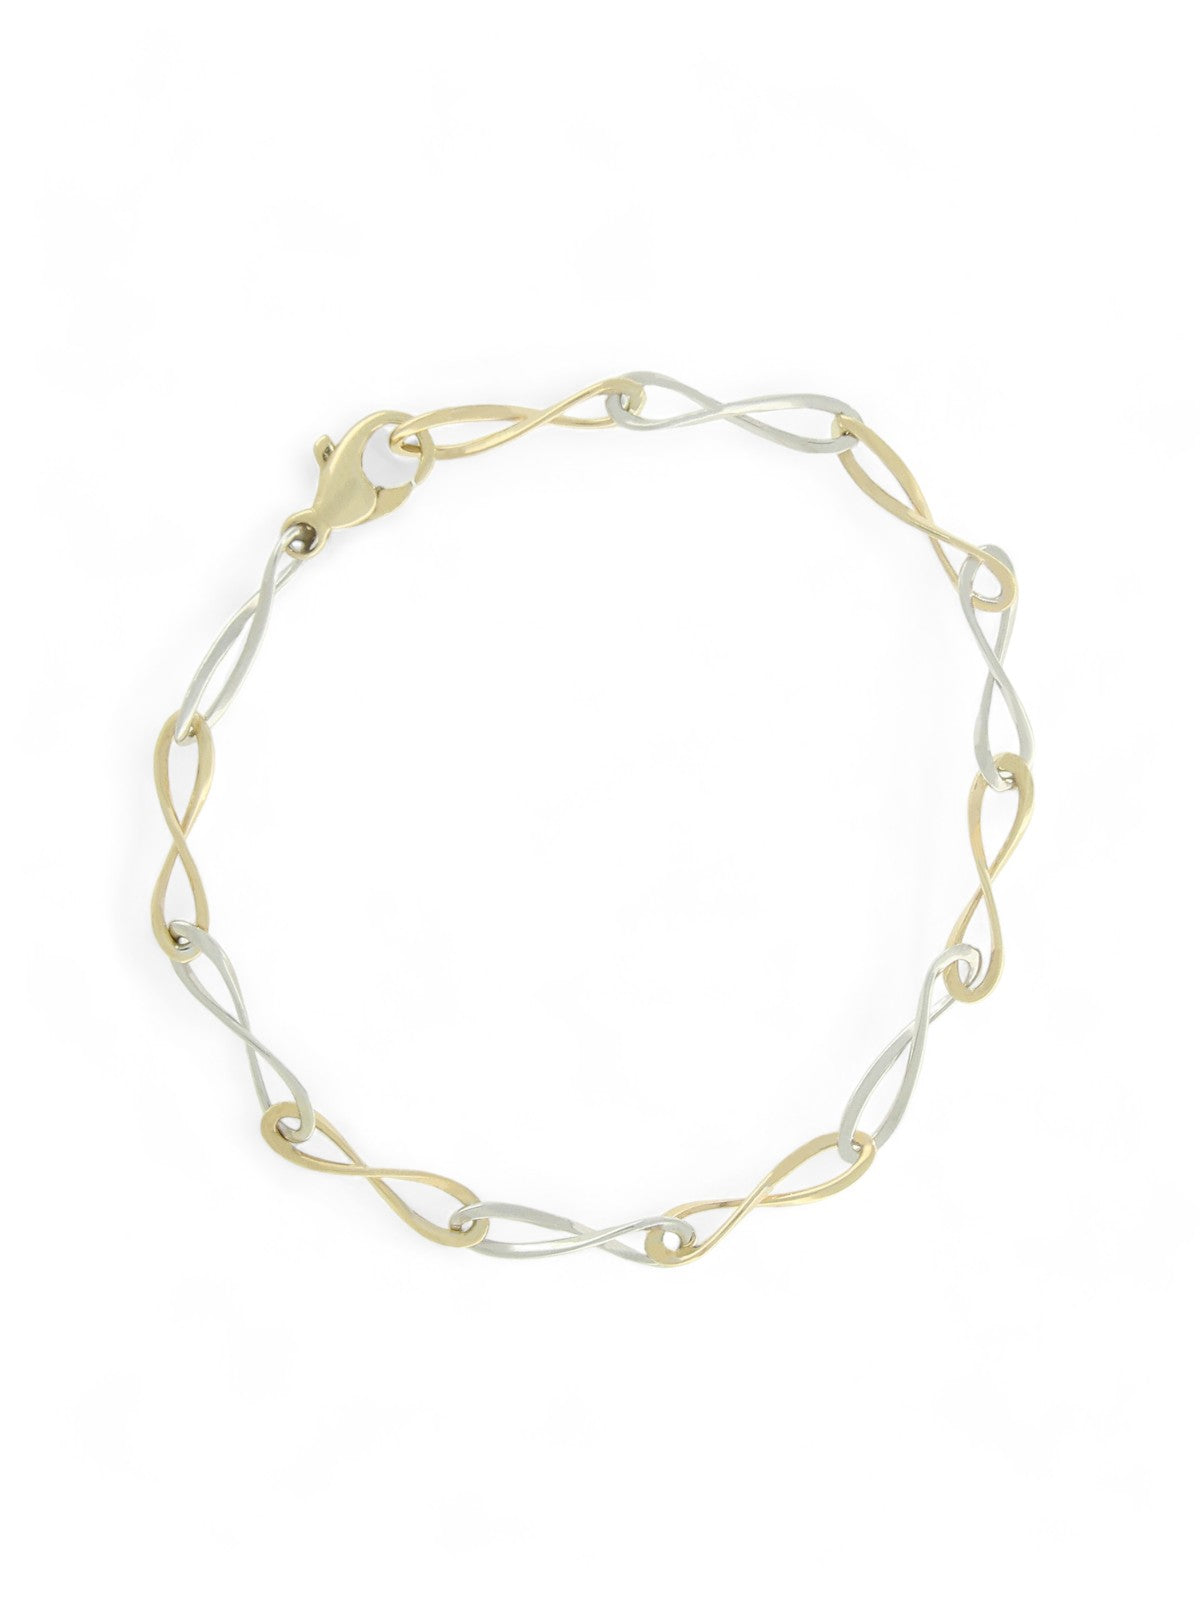 Elongated Figure of 8 Bracelet in 9ct Yellow & White Gold